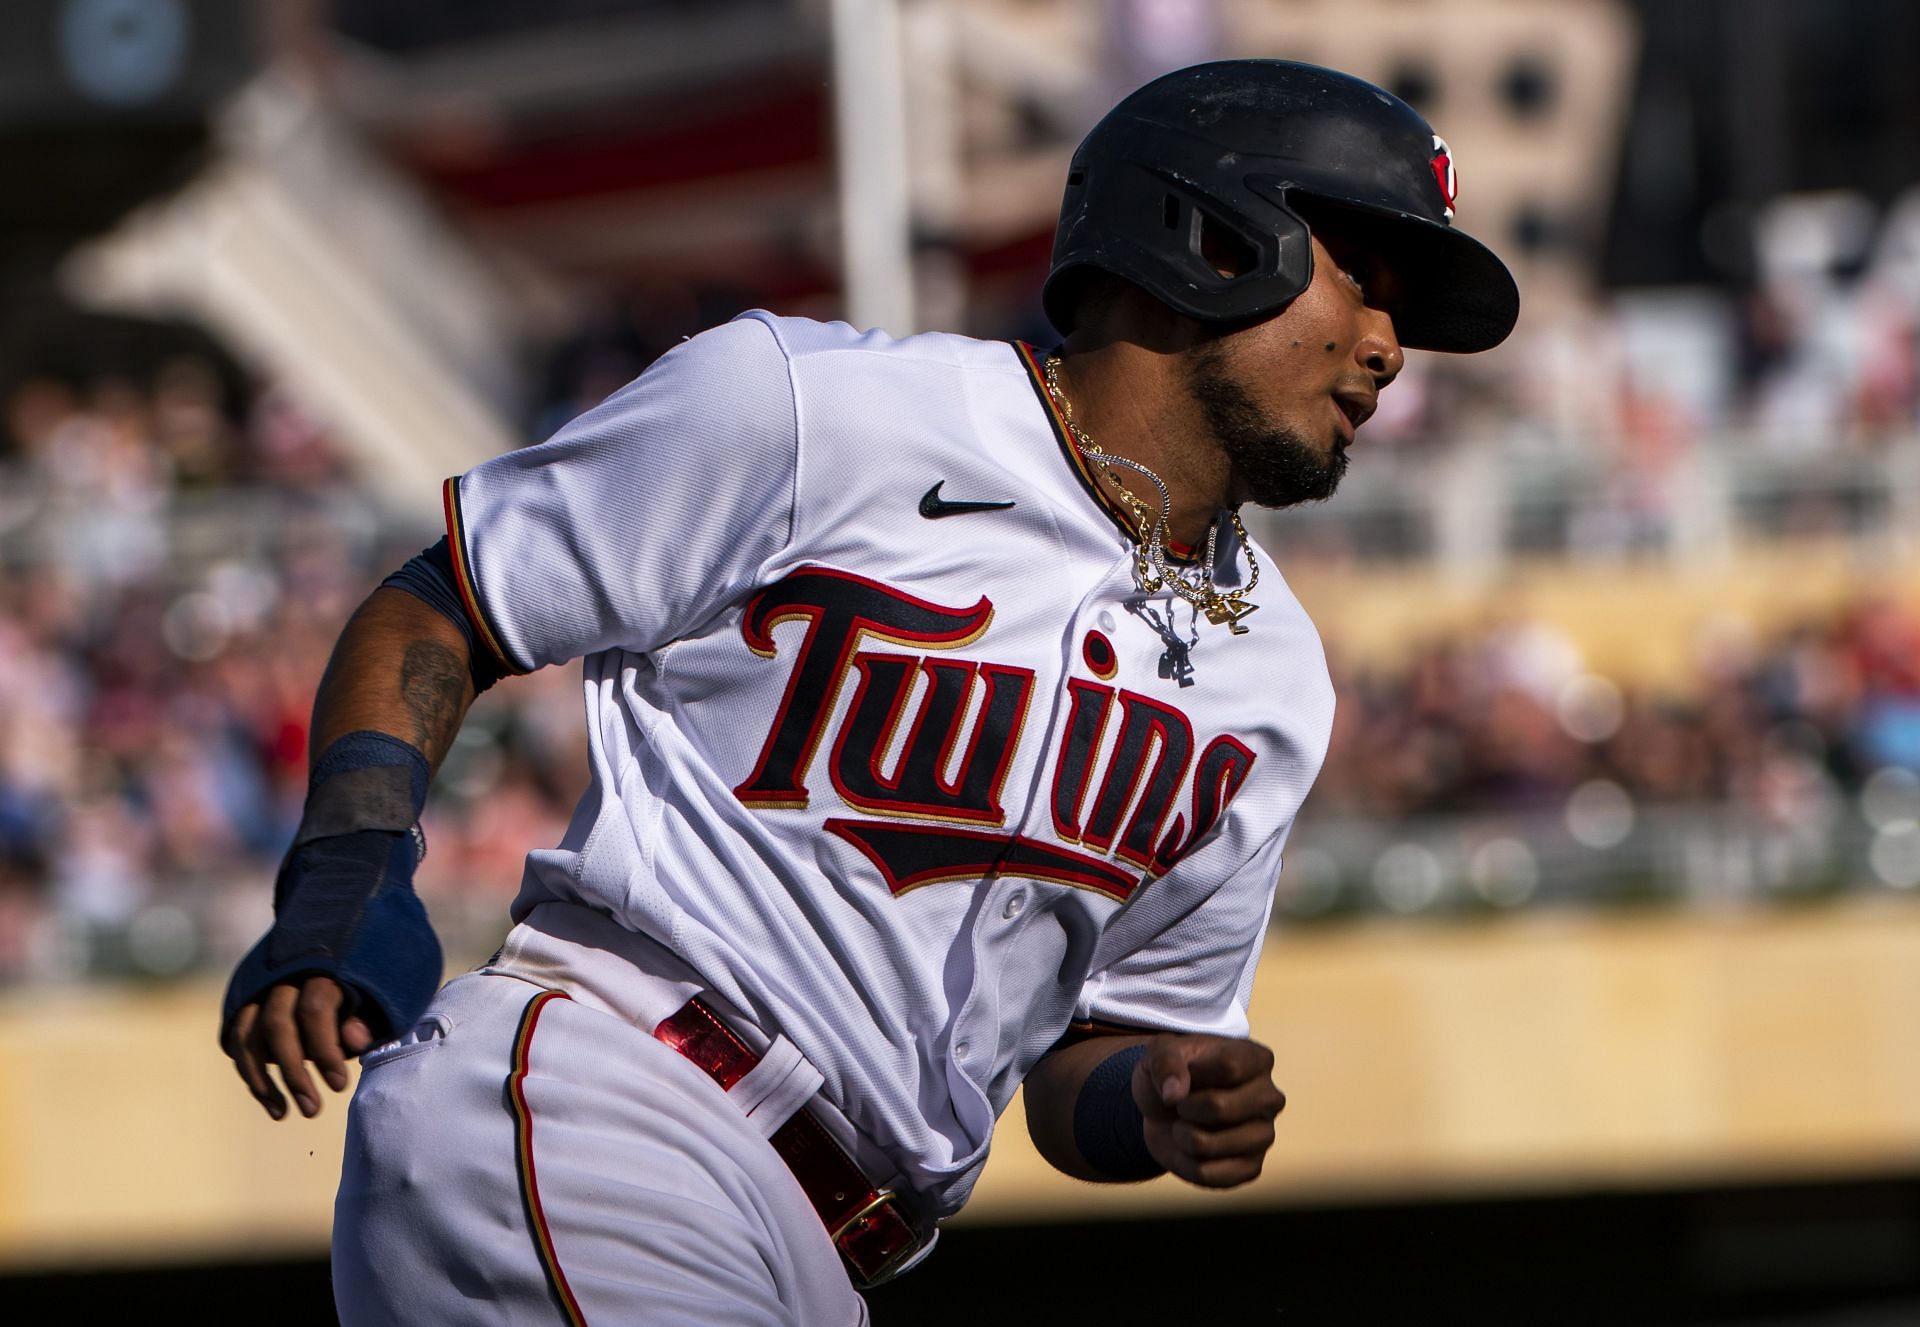 Could the Twins Add Another First Baseman After Trading Luis Arraez?